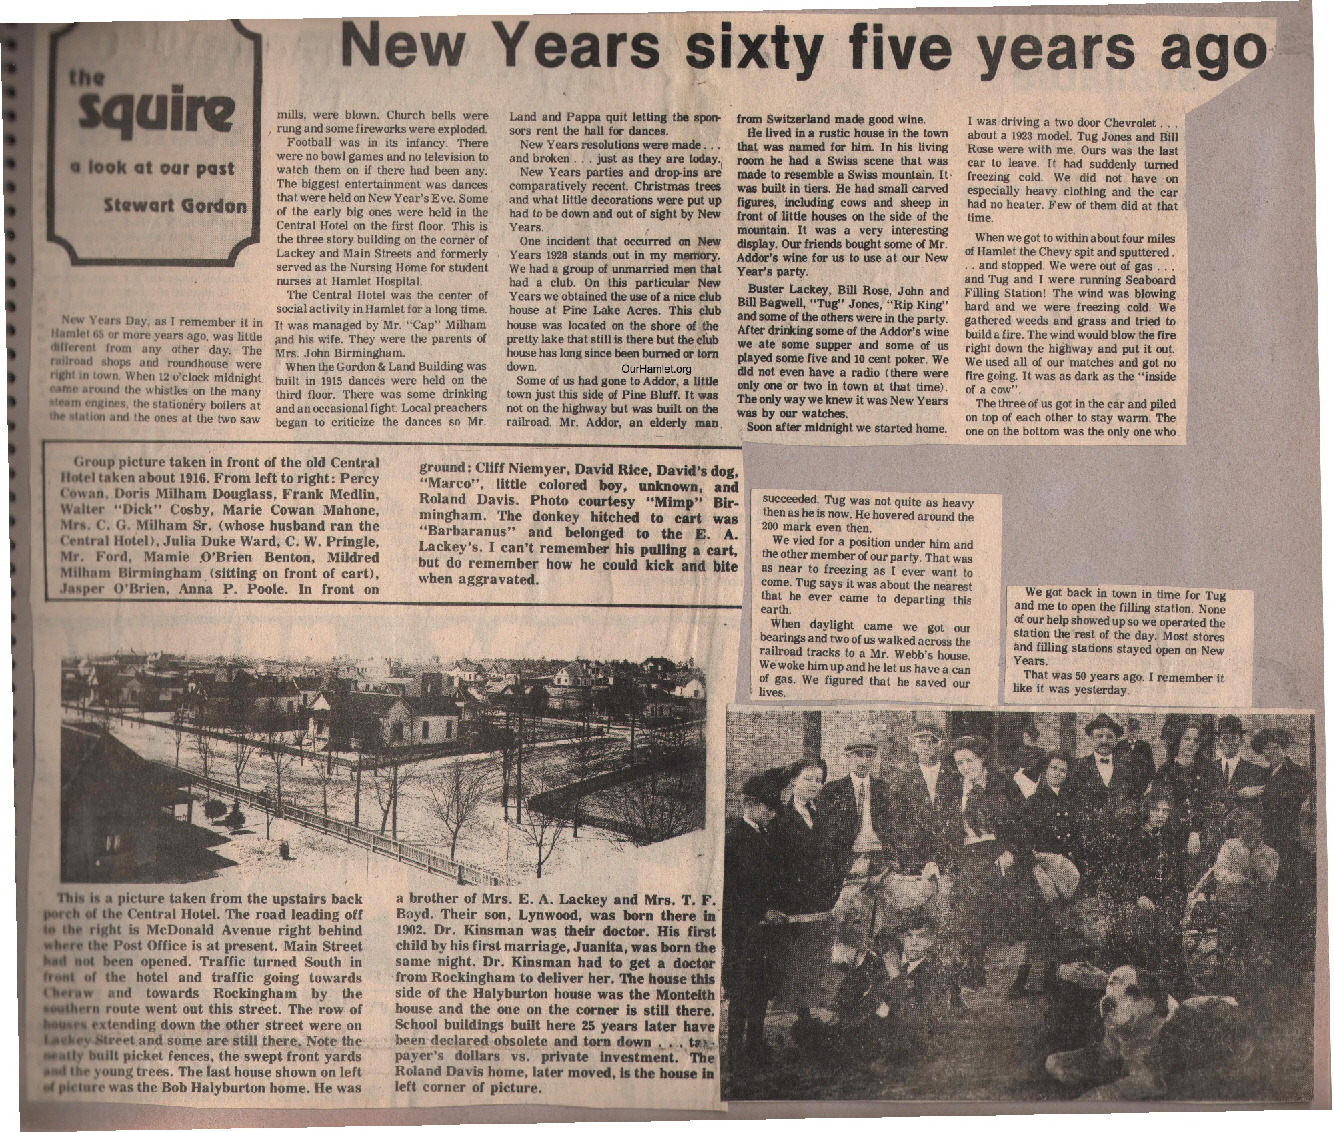 The Squire - New Years sixty five years ago OH